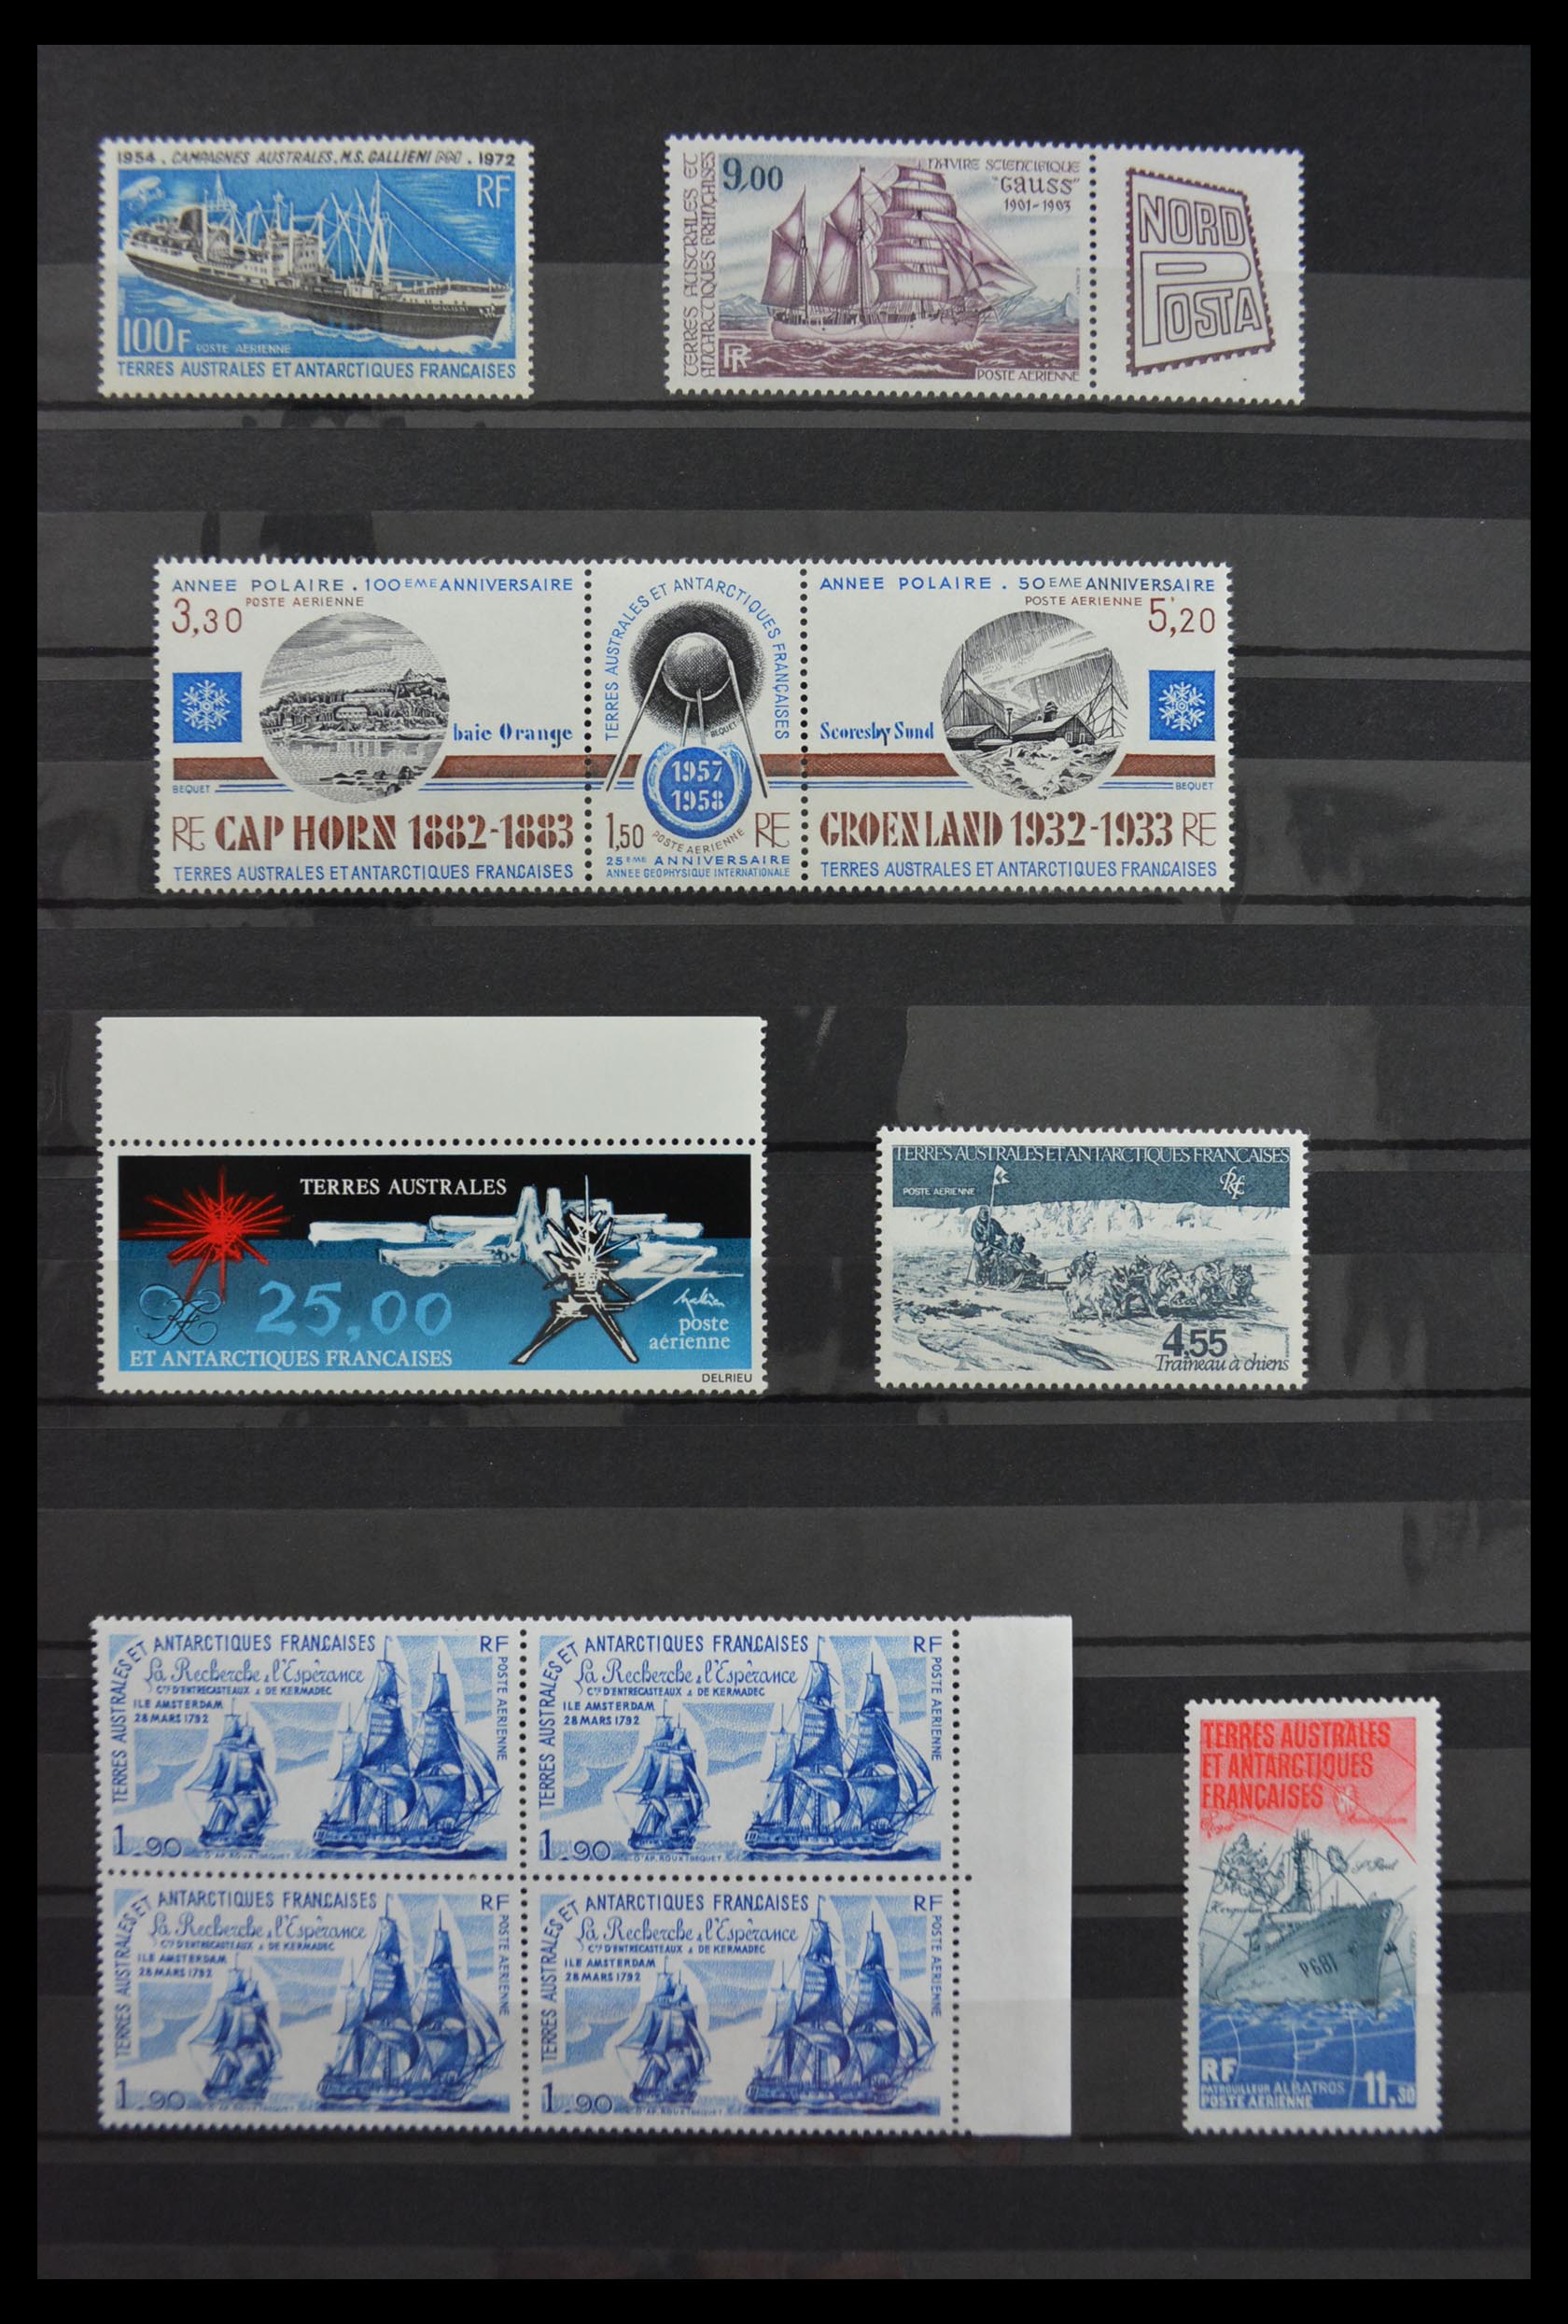 29940 566 - 29940 Great Britain and Colonies 1920-1970.